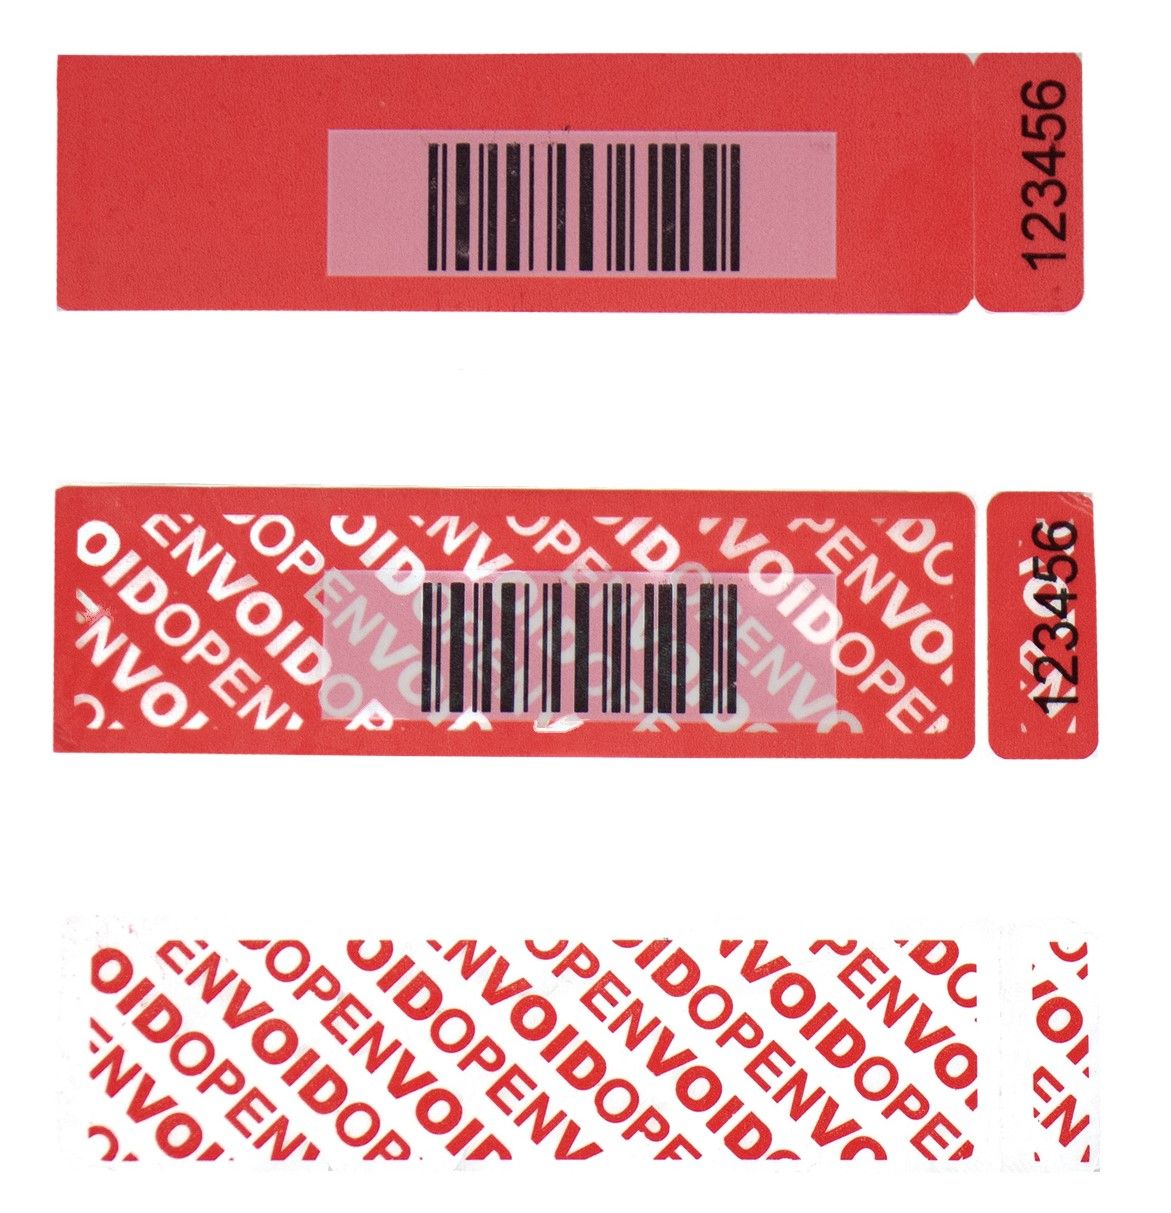 Types of tamper evident security labels explained